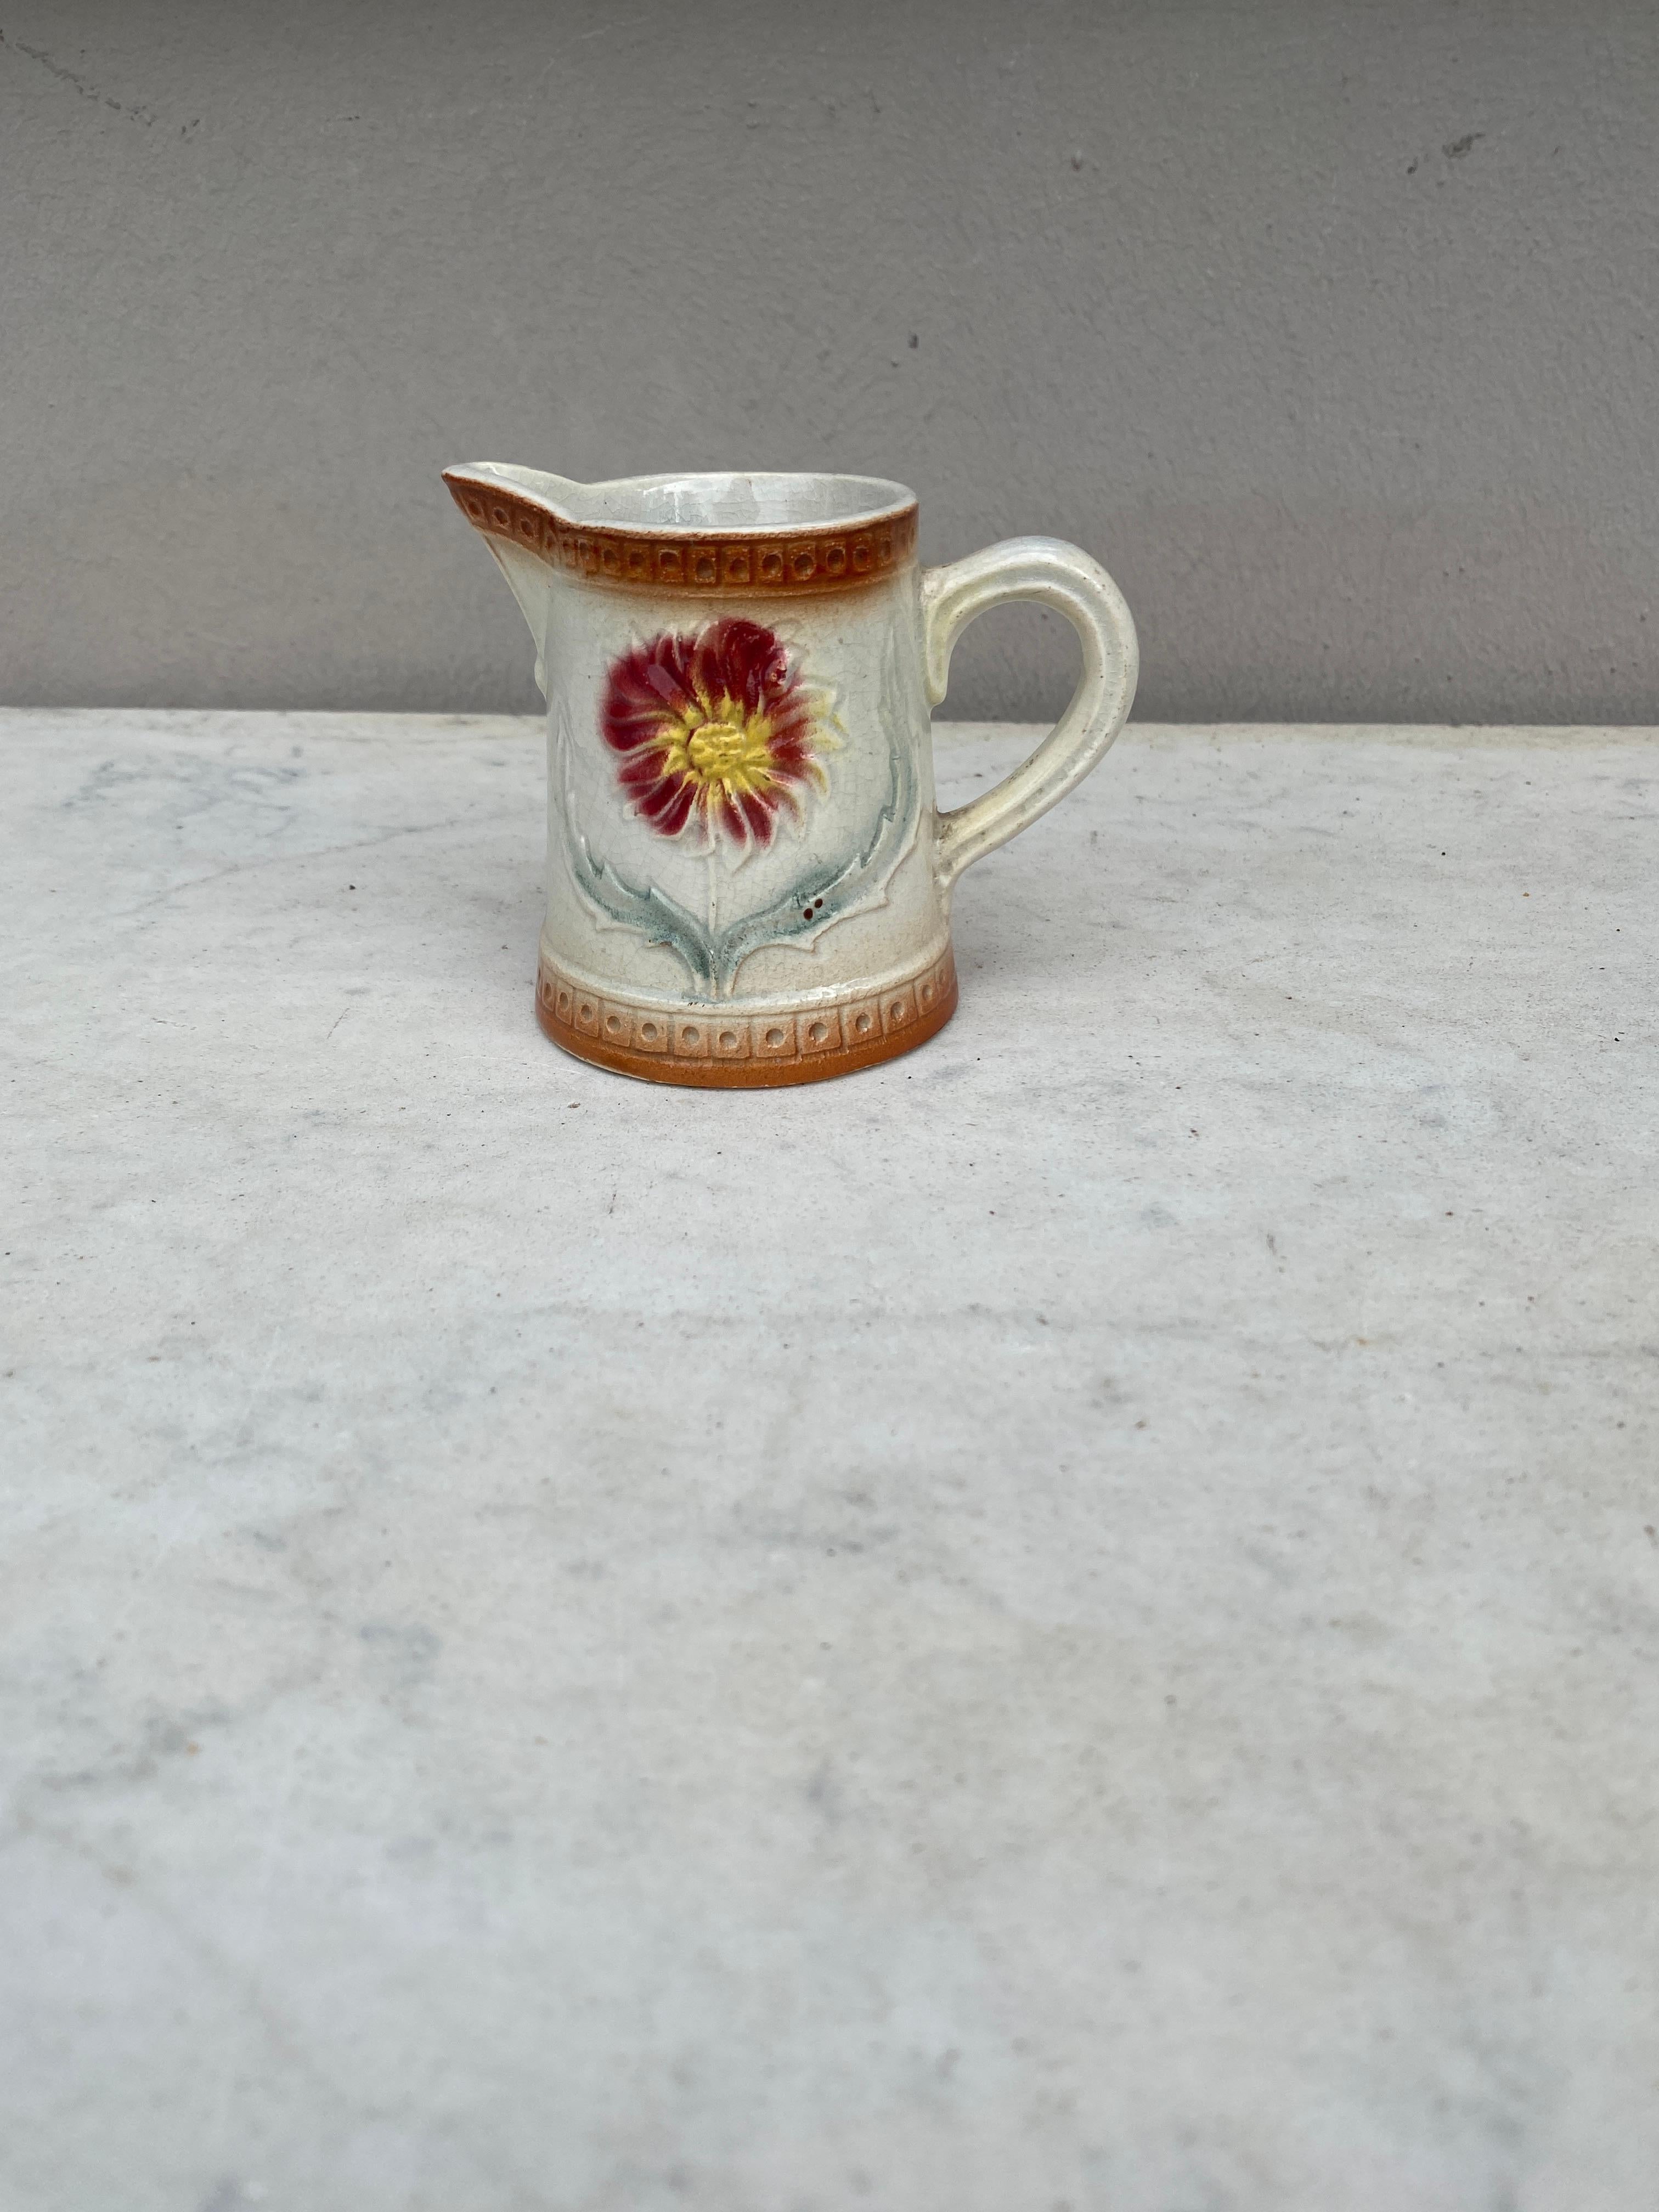 Charming Small French Majolica Pitcher Creamer decorated with a red flower.